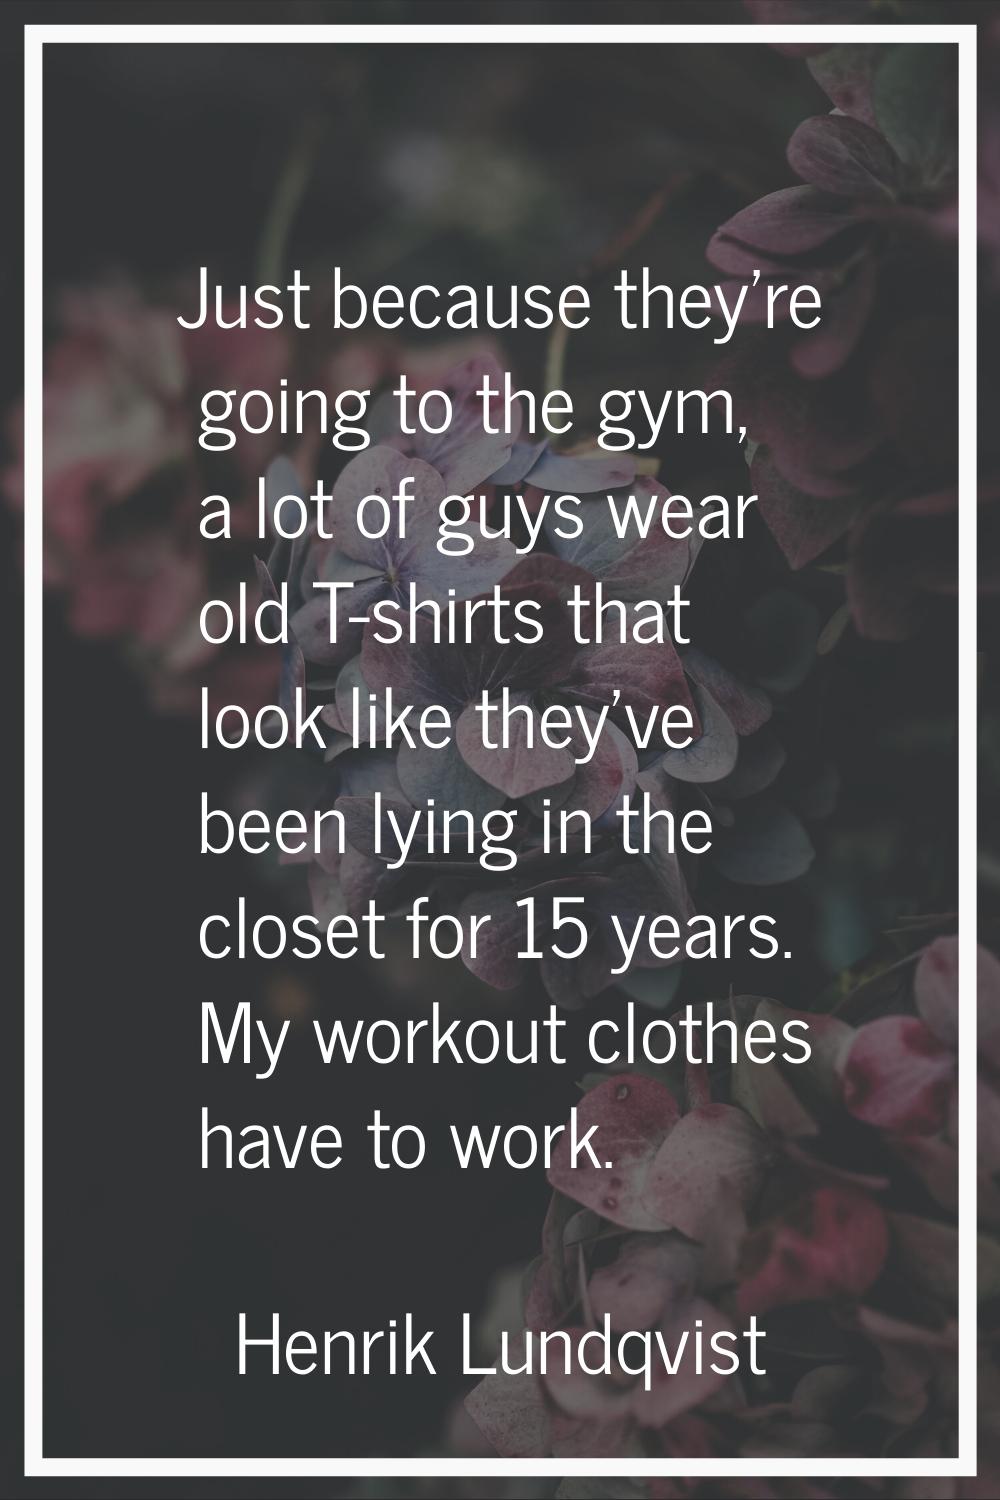 Just because they're going to the gym, a lot of guys wear old T-shirts that look like they've been 